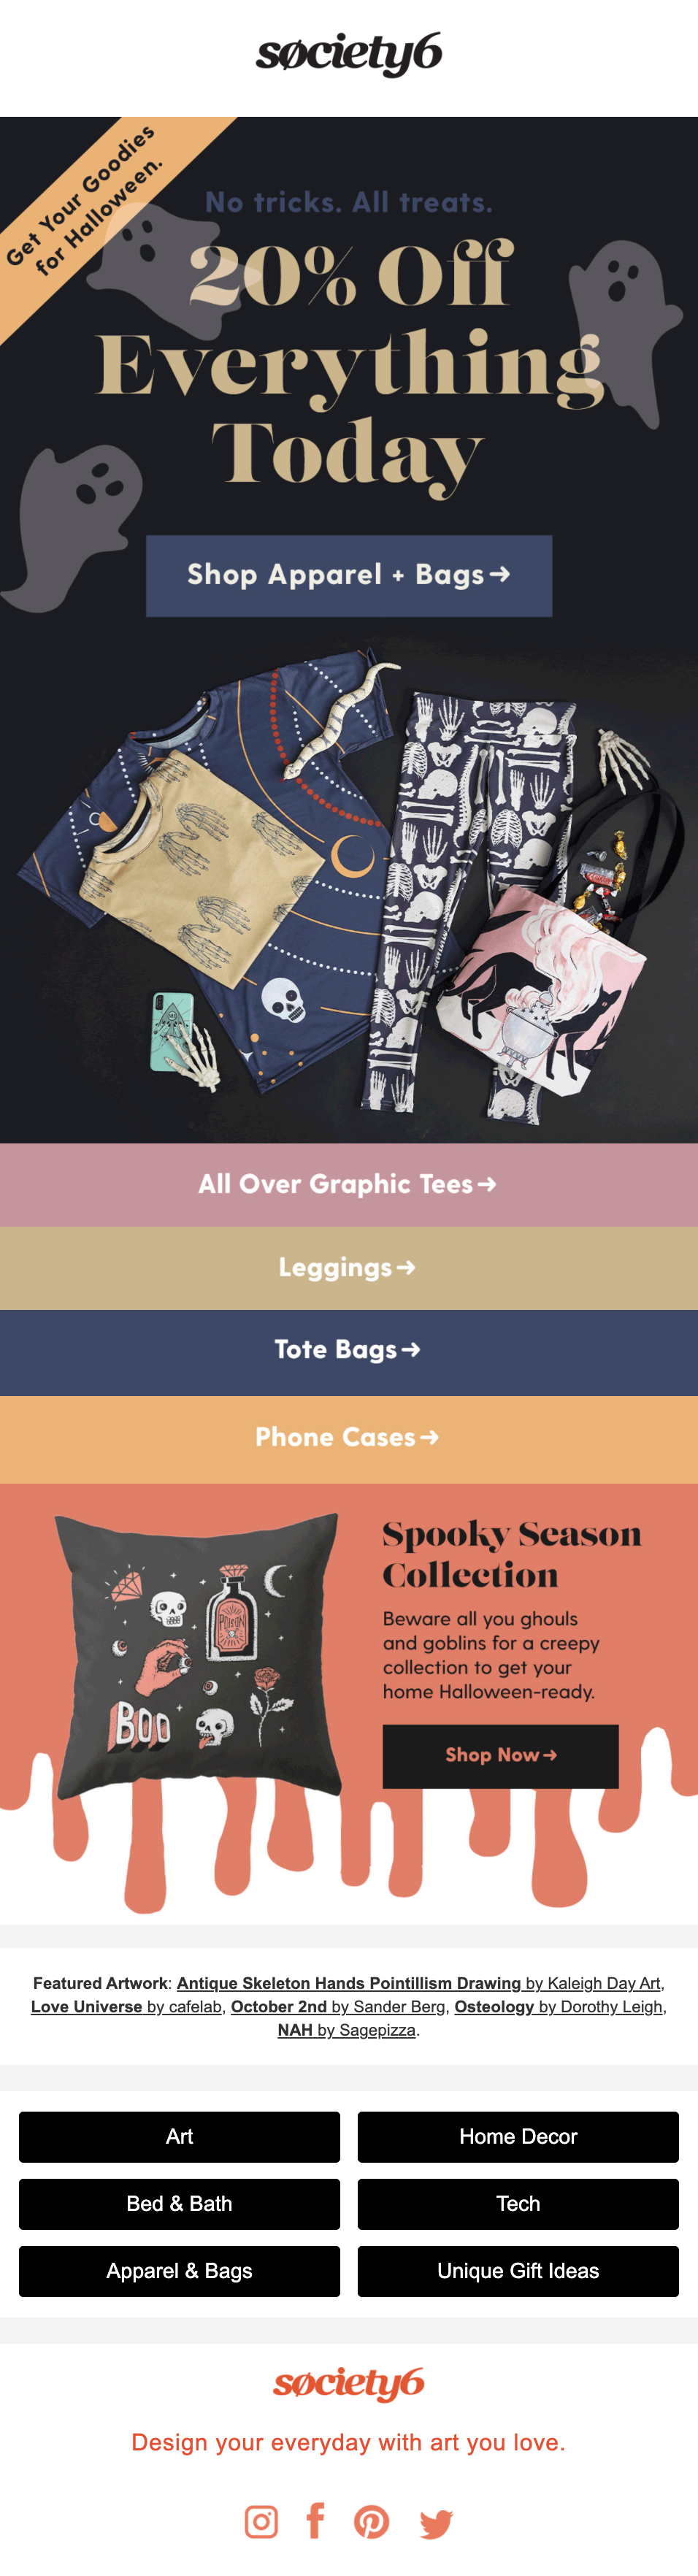 society6 halloween newsletter with ghost design and suggestions for spooky products